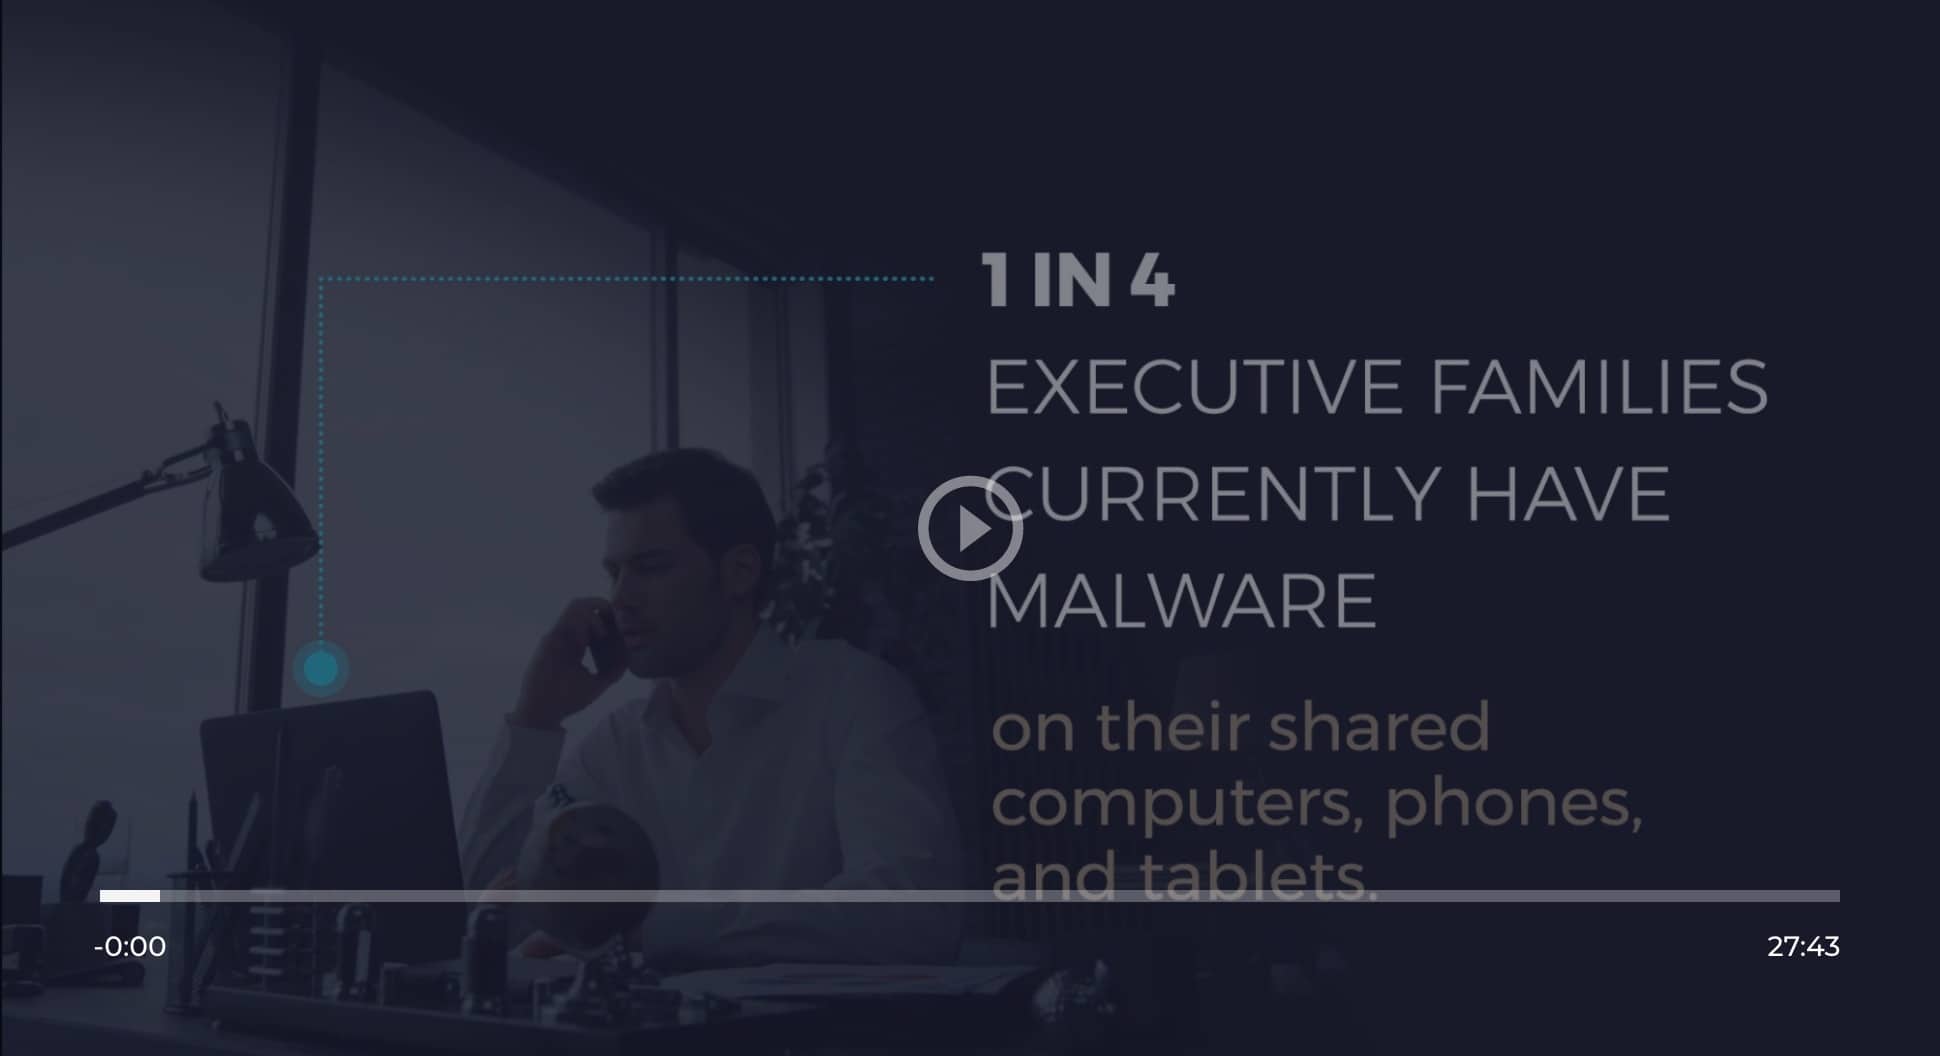 Video with text “1 in 4 executive families currently have malware”